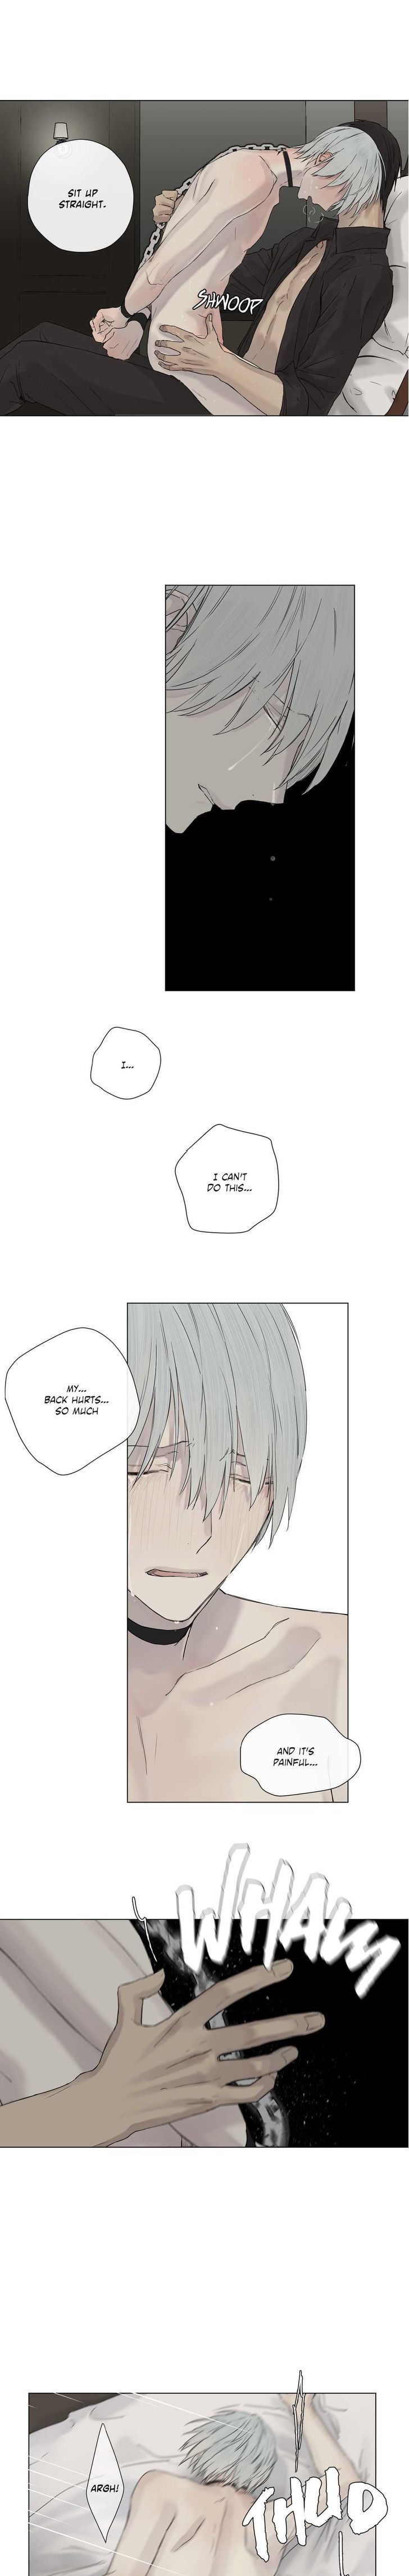 Royal Servant - Chapter 8 Page 9